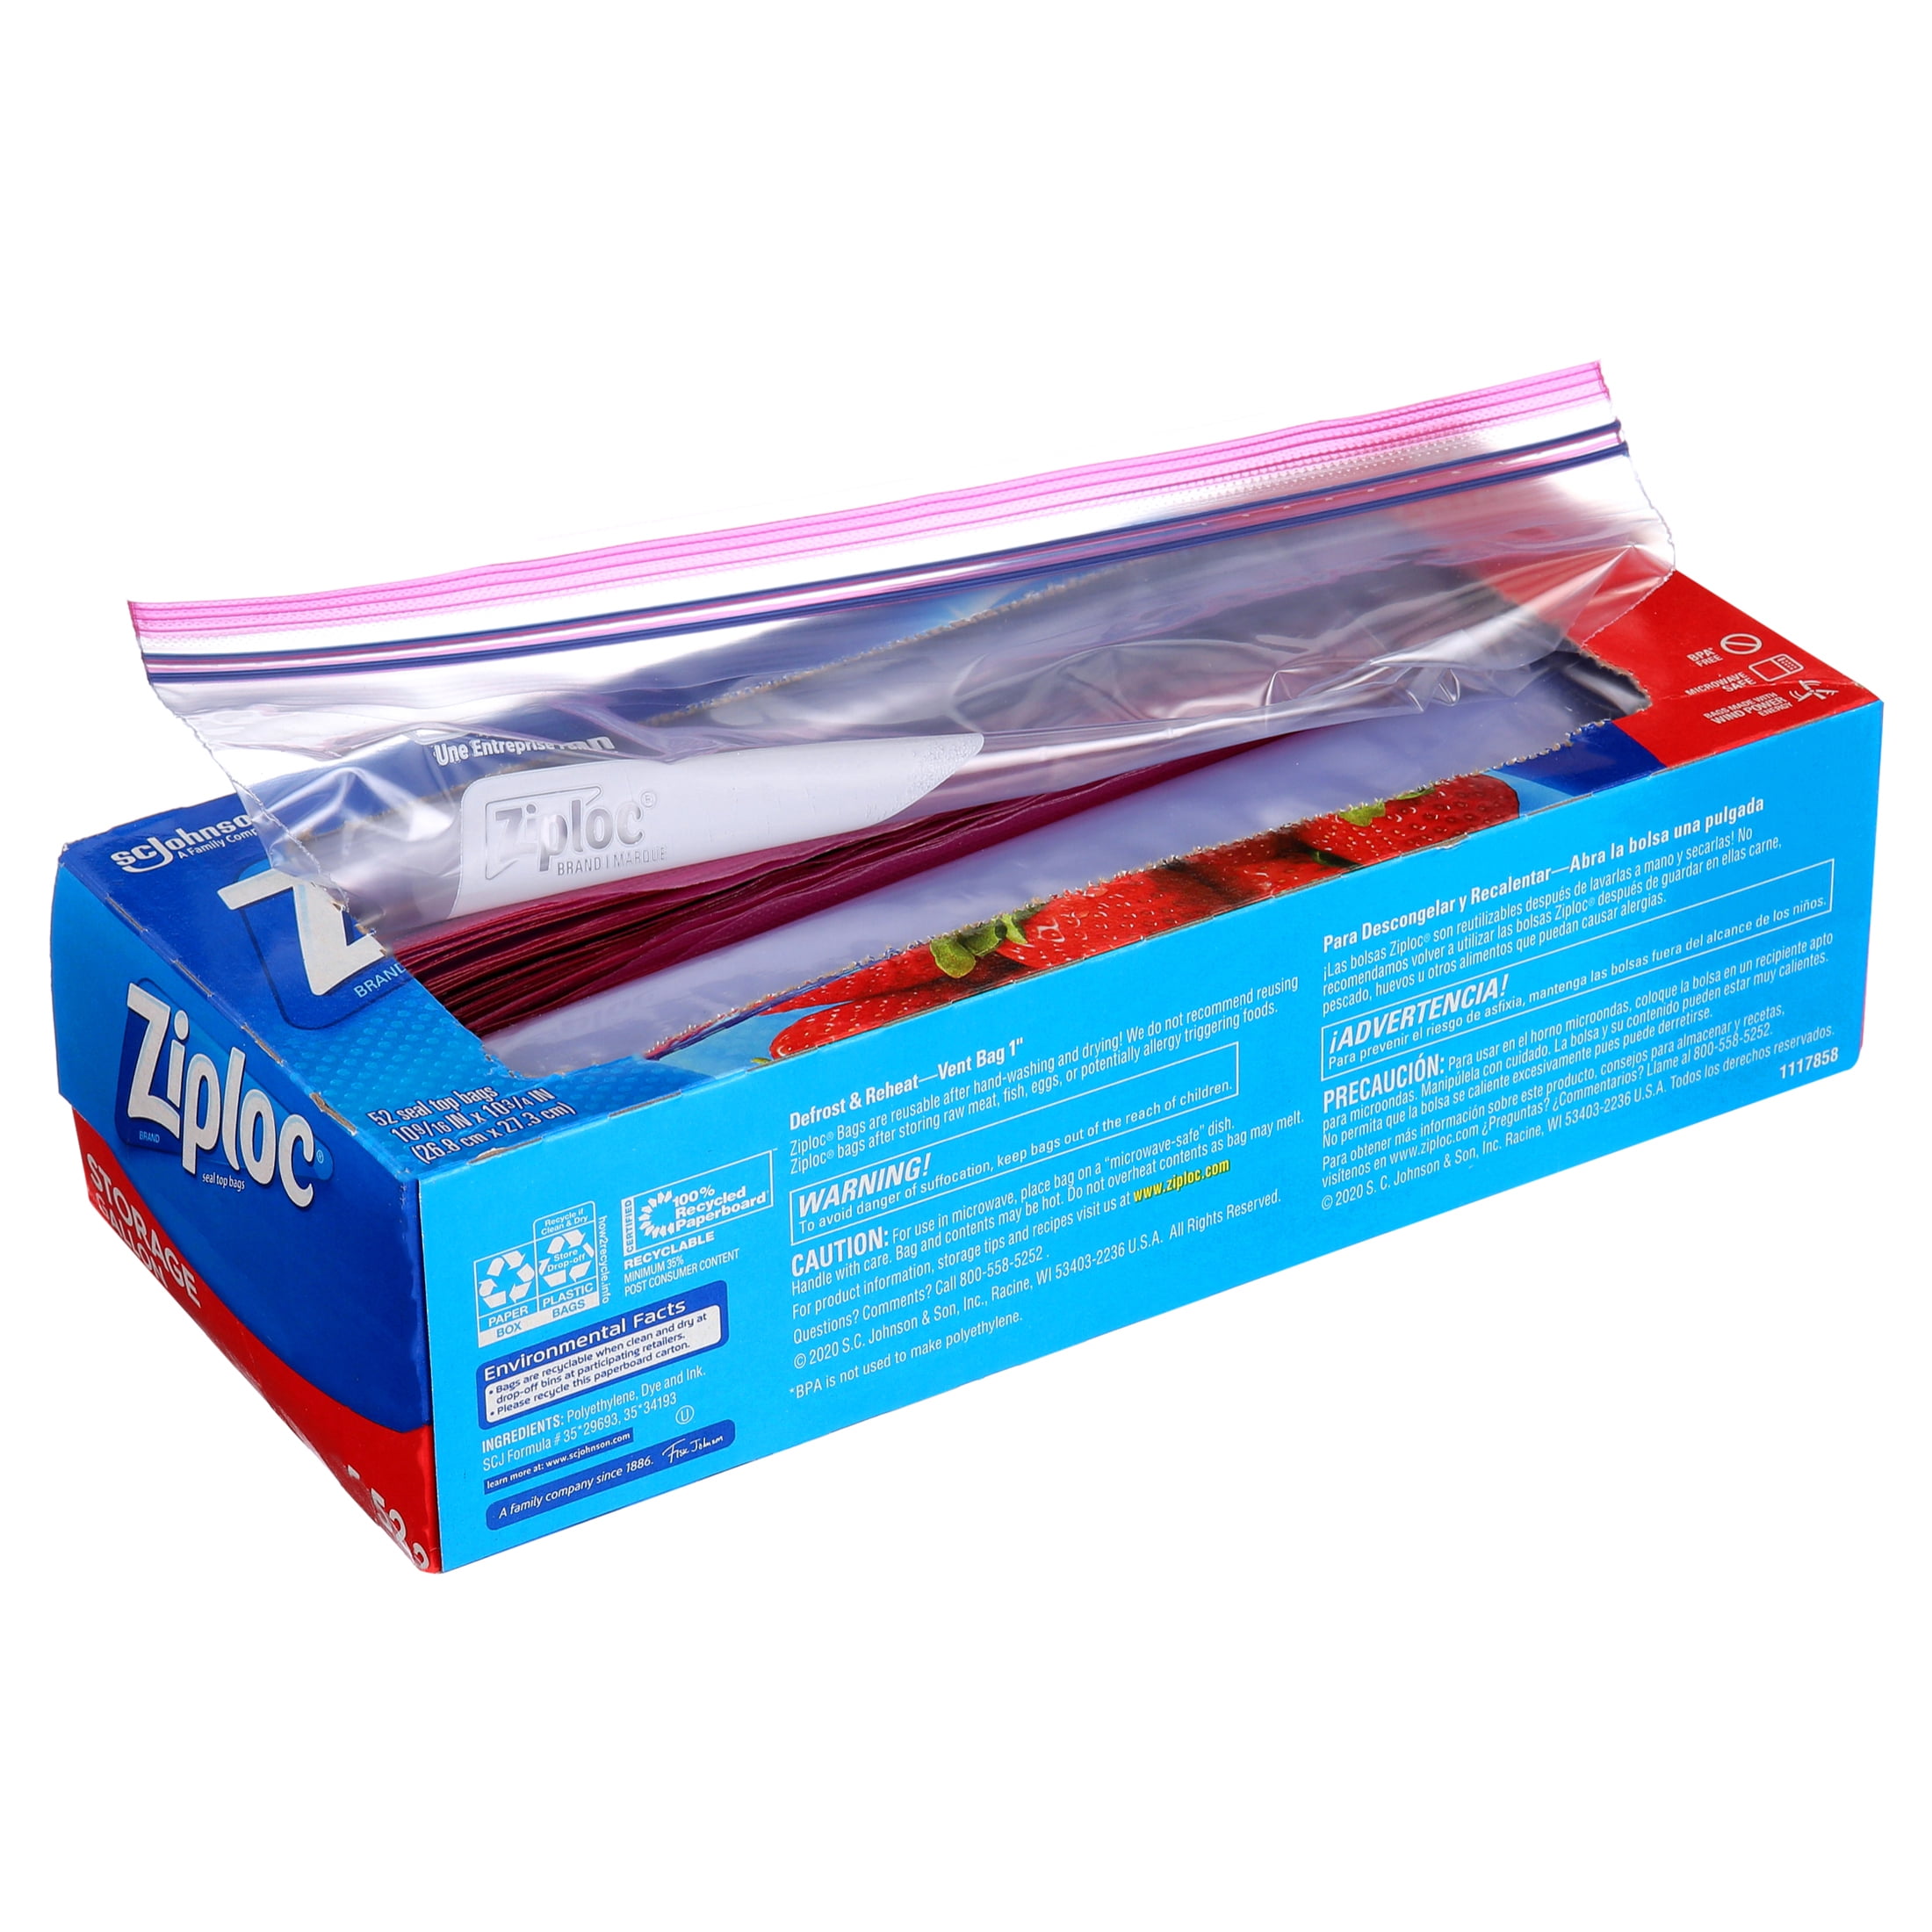 Ziploc Pantry Collection – Variety Pack of 4